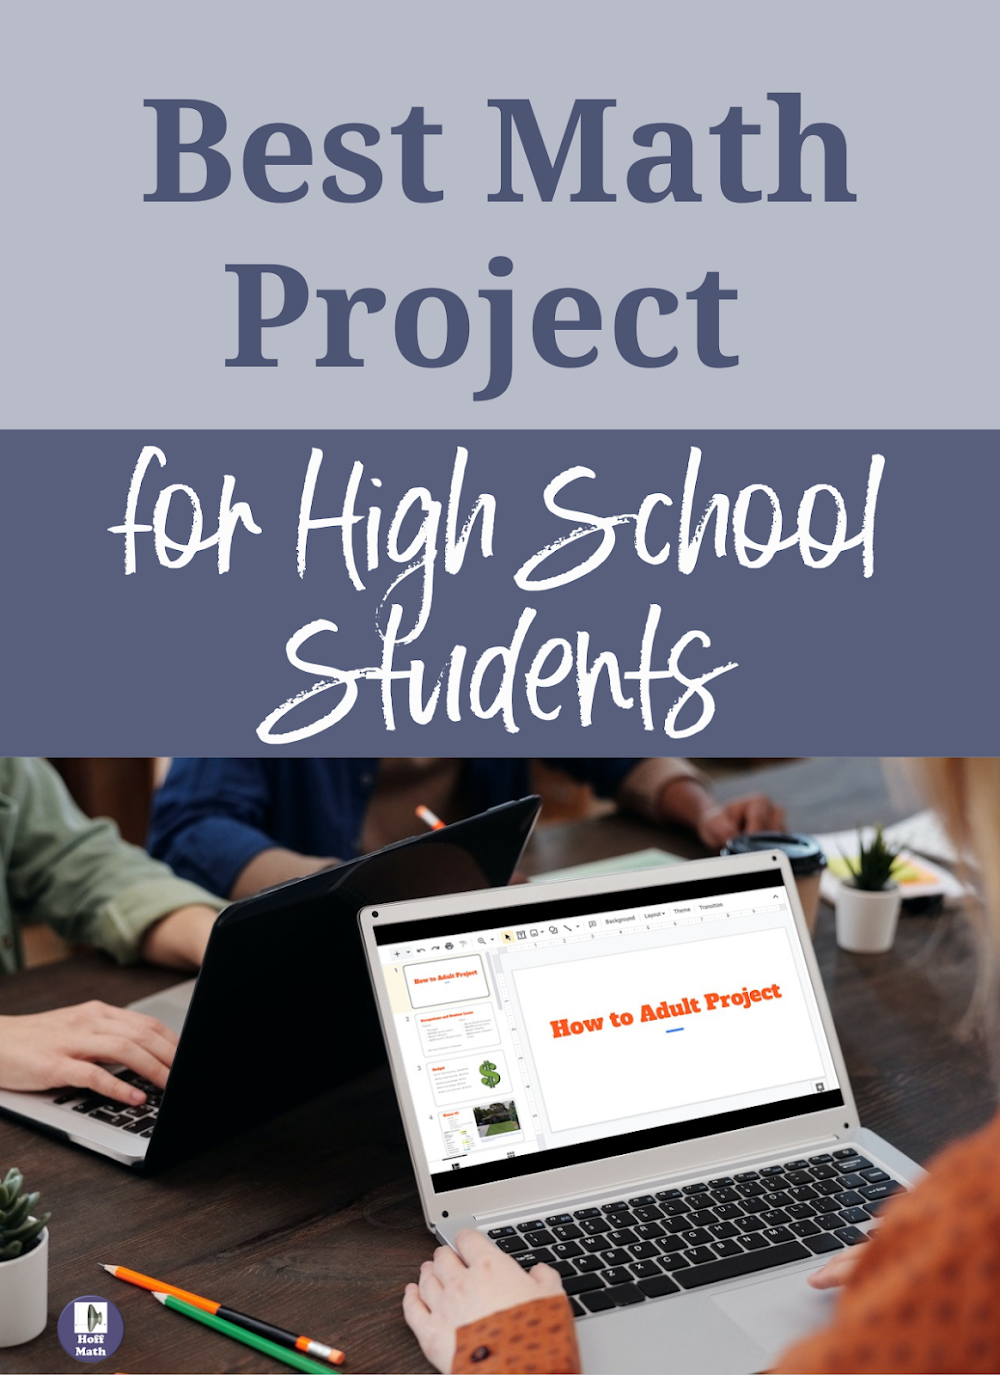 Best Math Project for High School Students